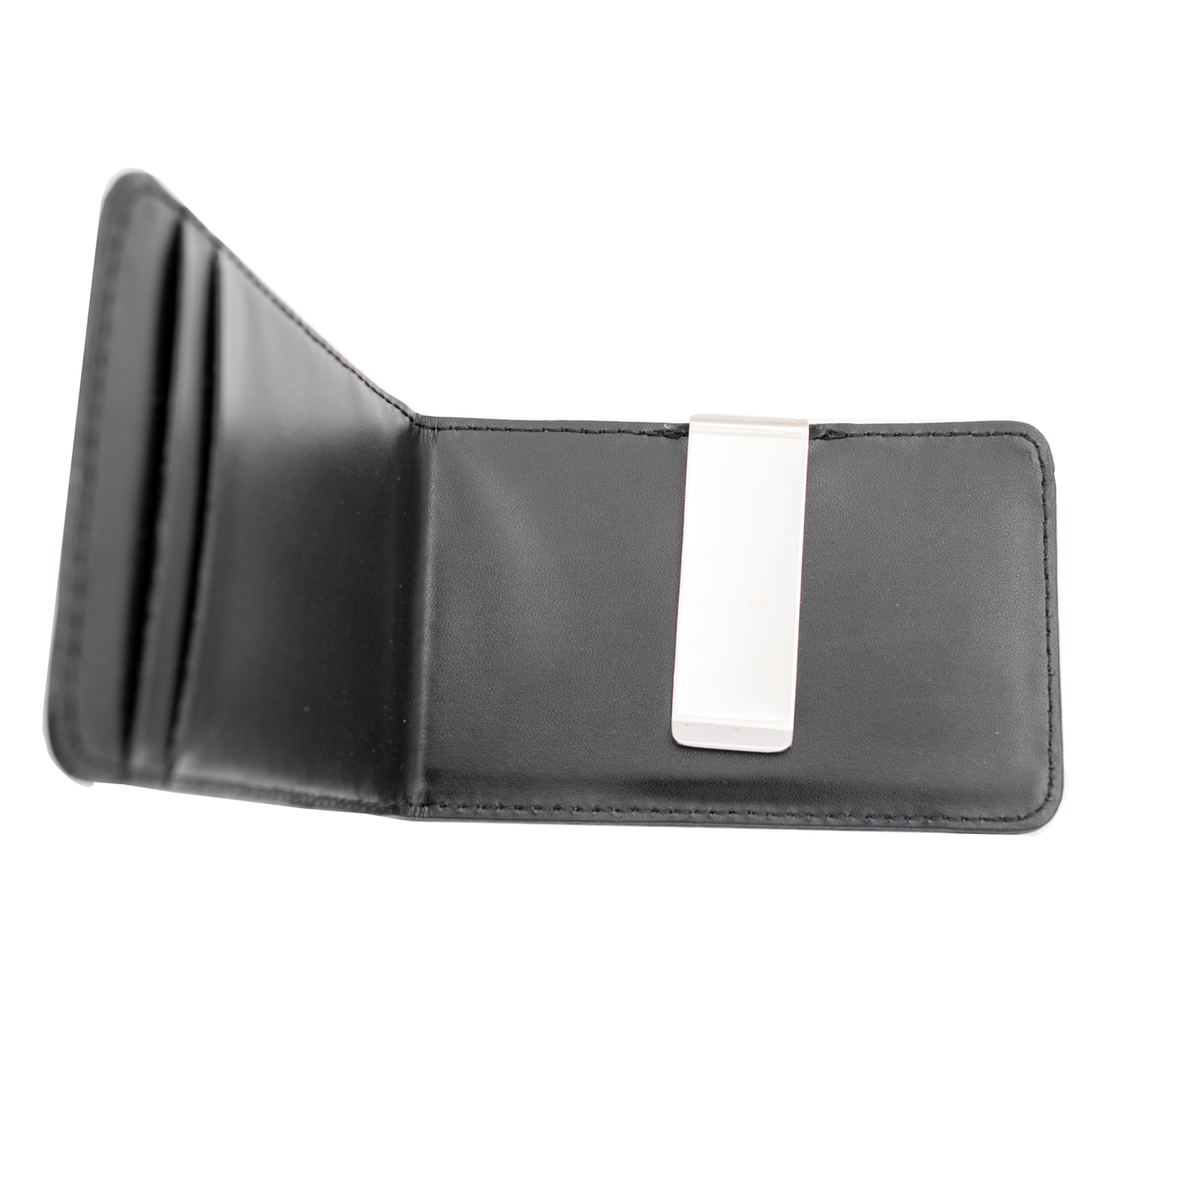 Black Leather Billfold with Moneyclip